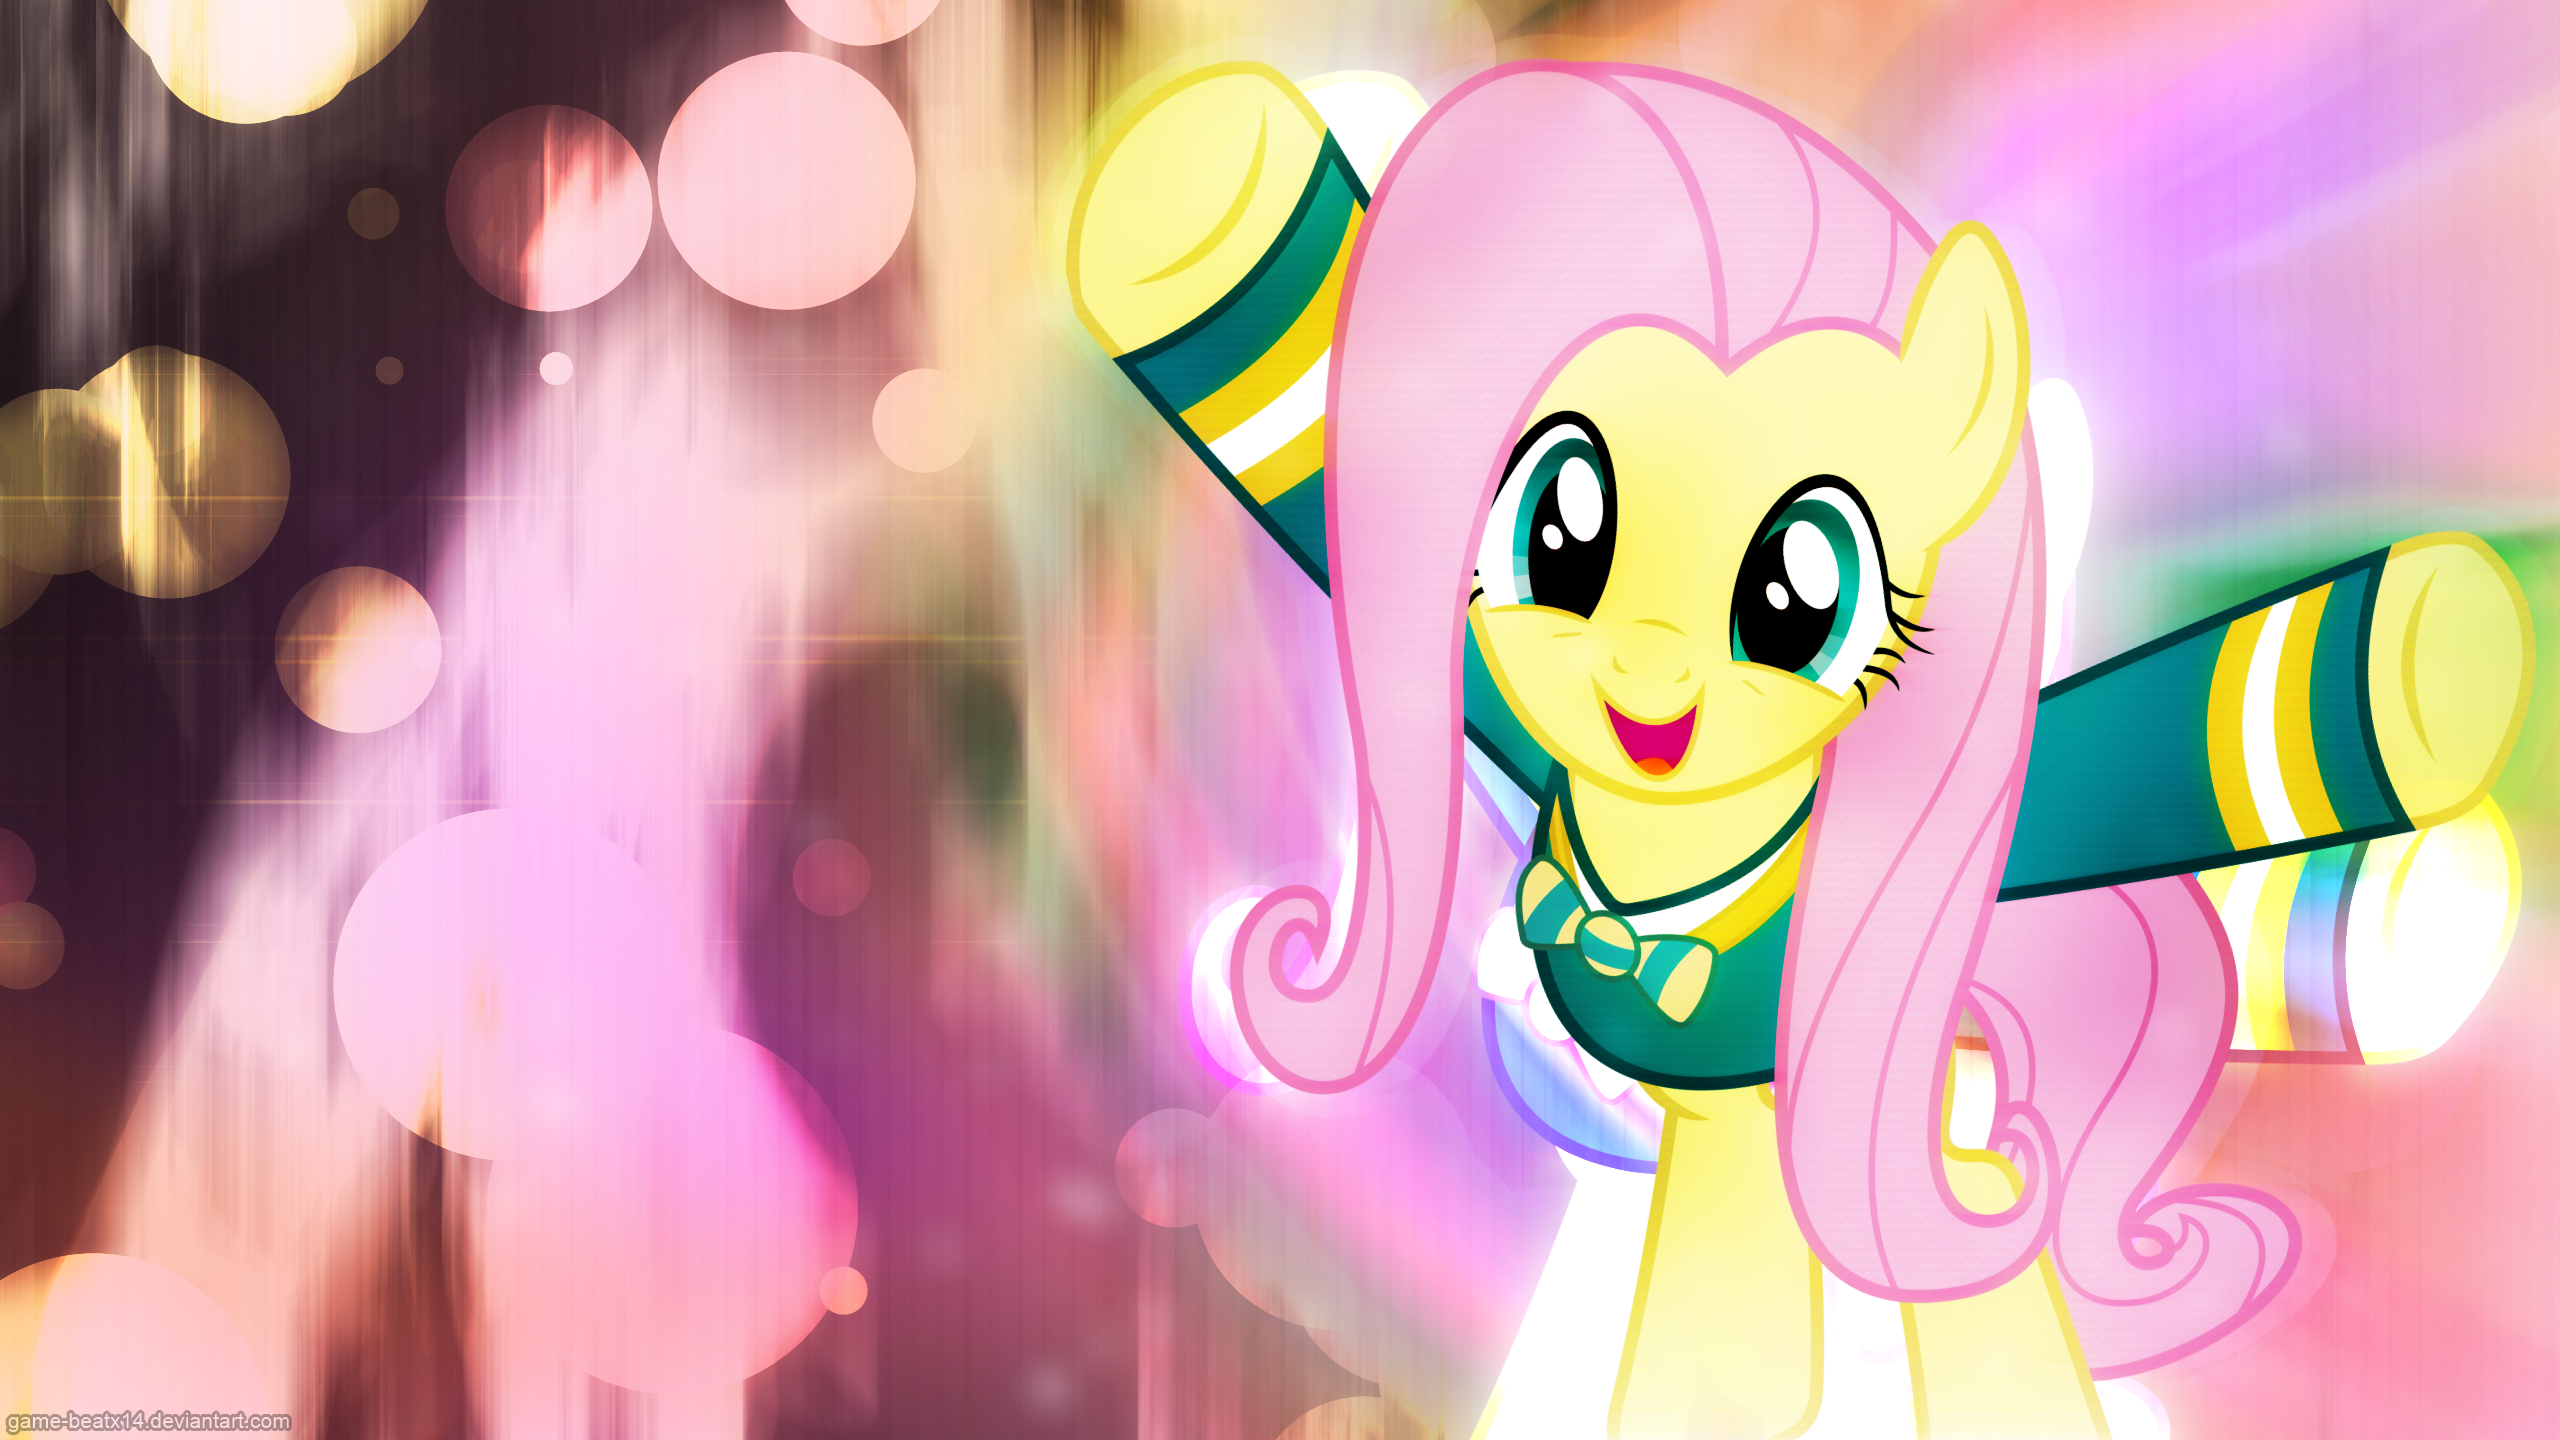 Fluttershy found the music by dasprid and Game-BeatX14